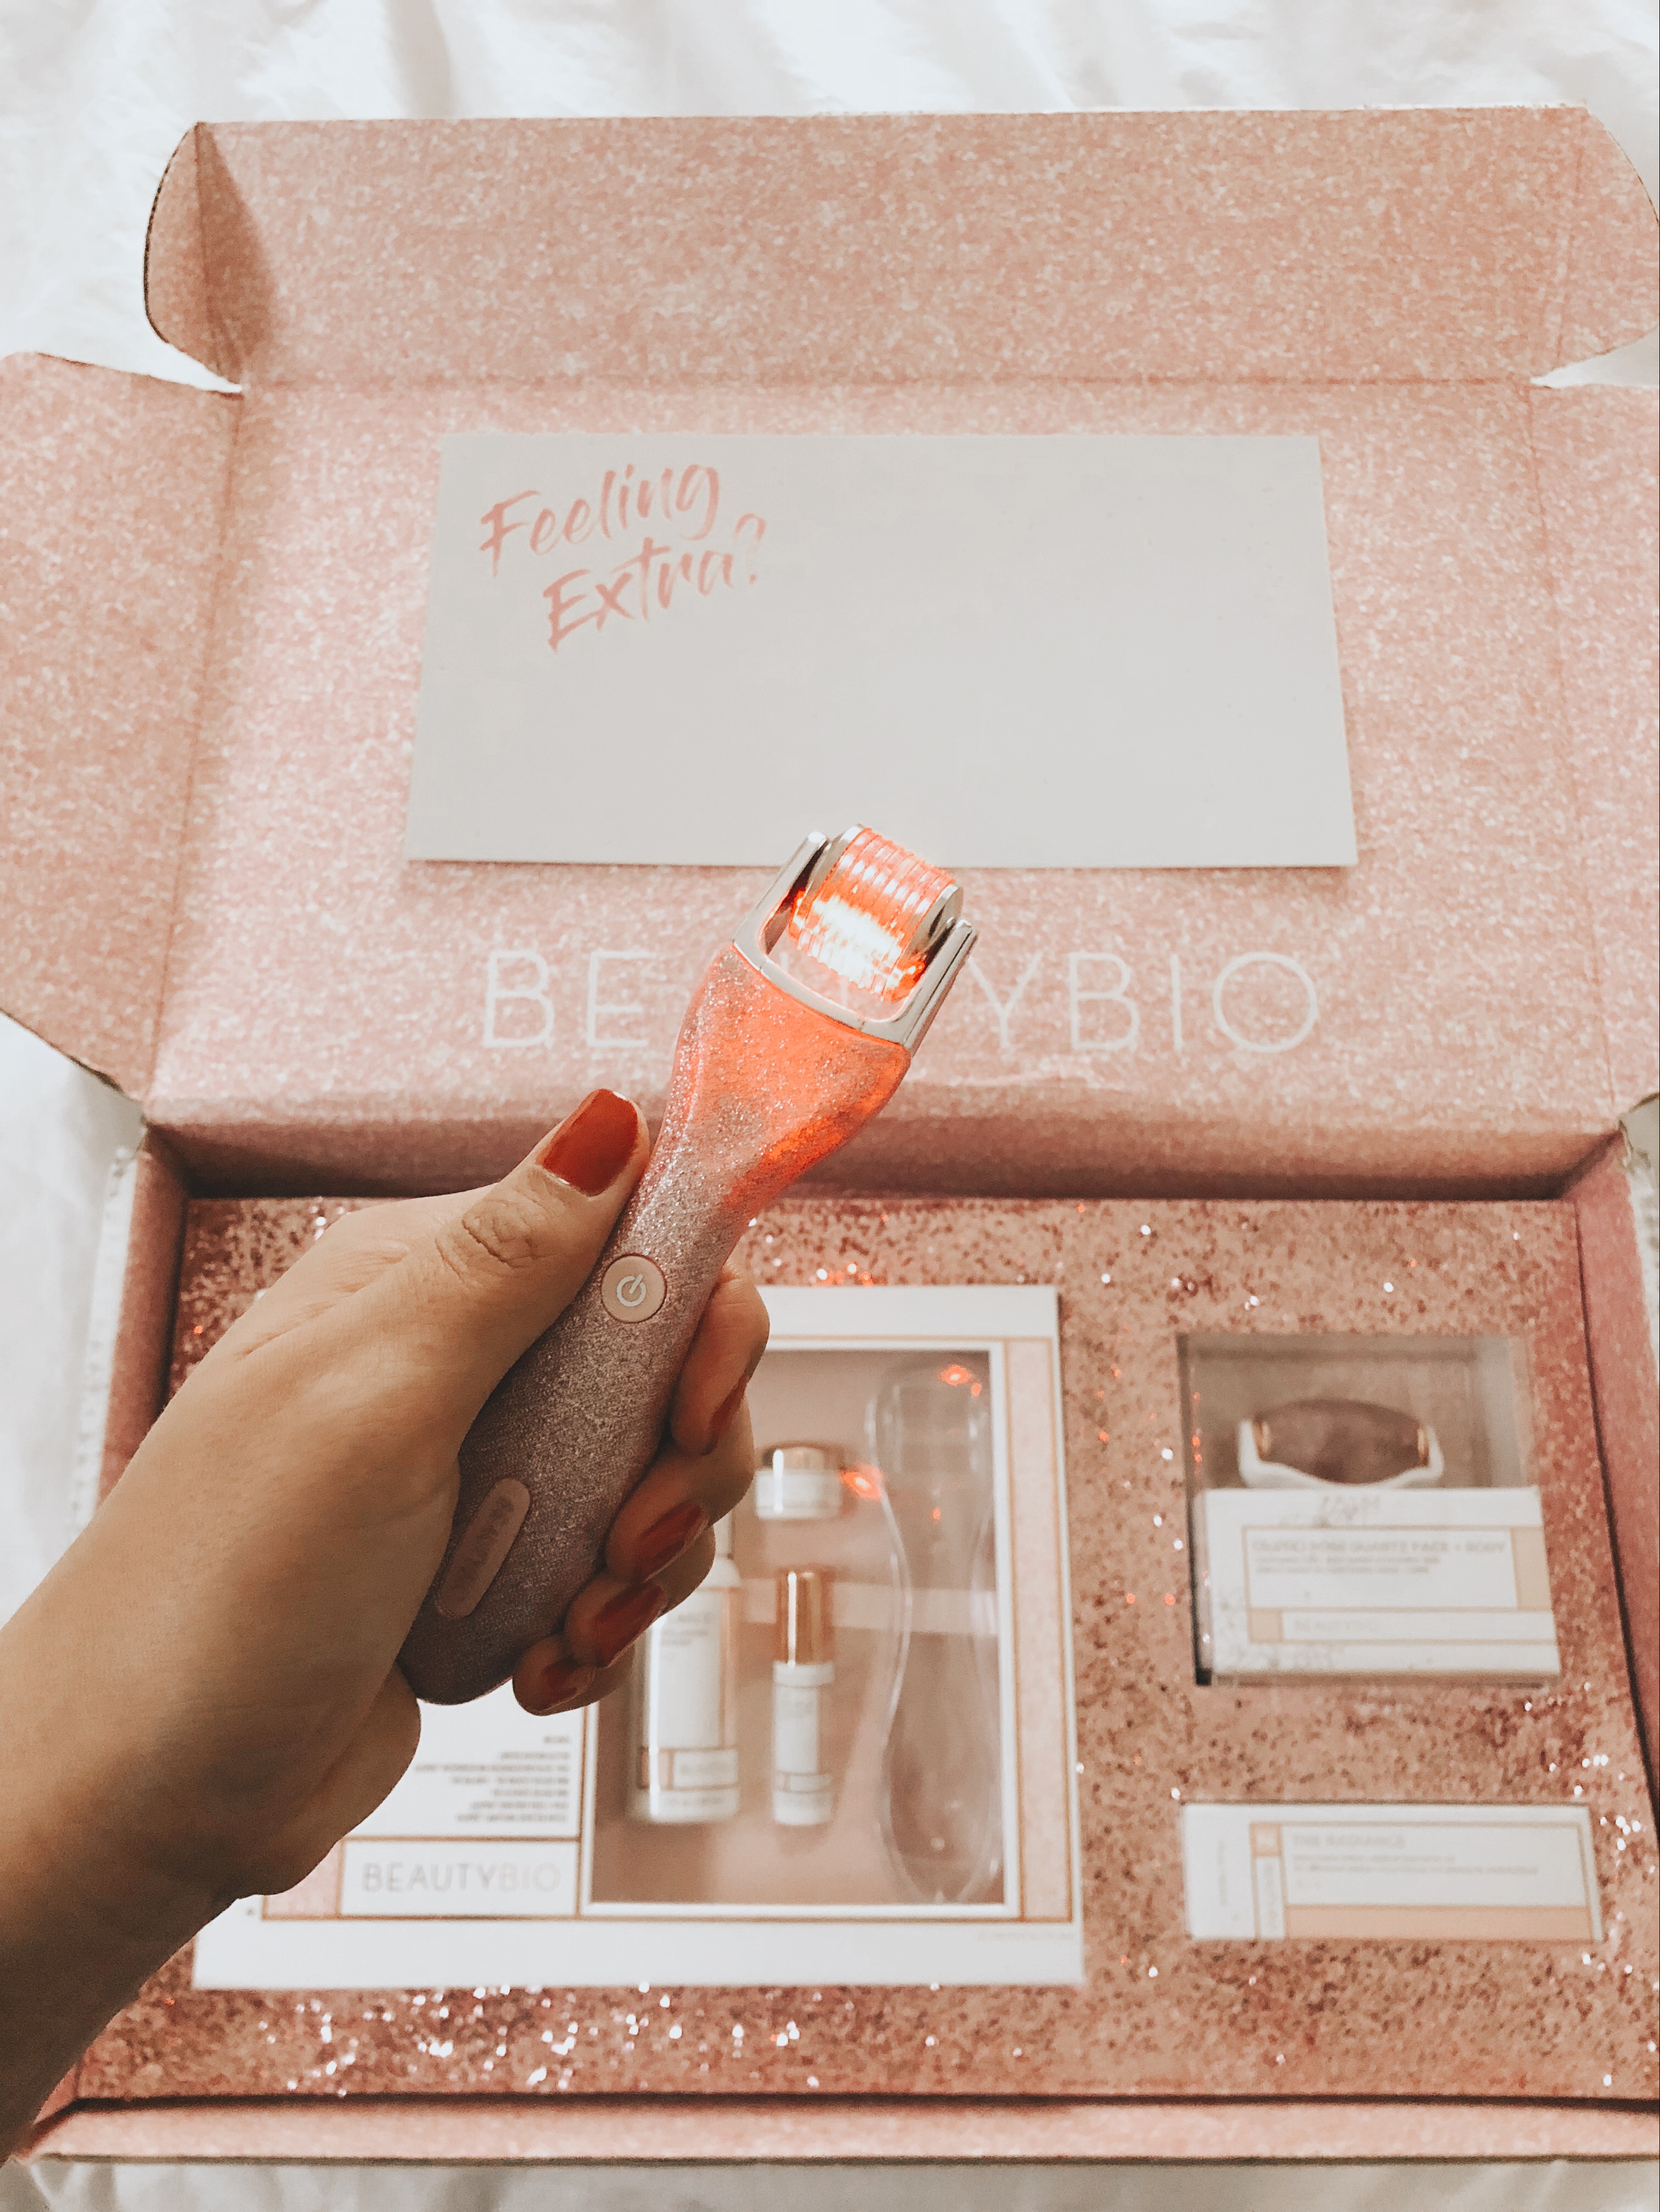 Ashley Zeal from Two Peas in a Prada shares her picks from the Sephora Rouge Sale. Featuring the GloPro by BeautyBio.